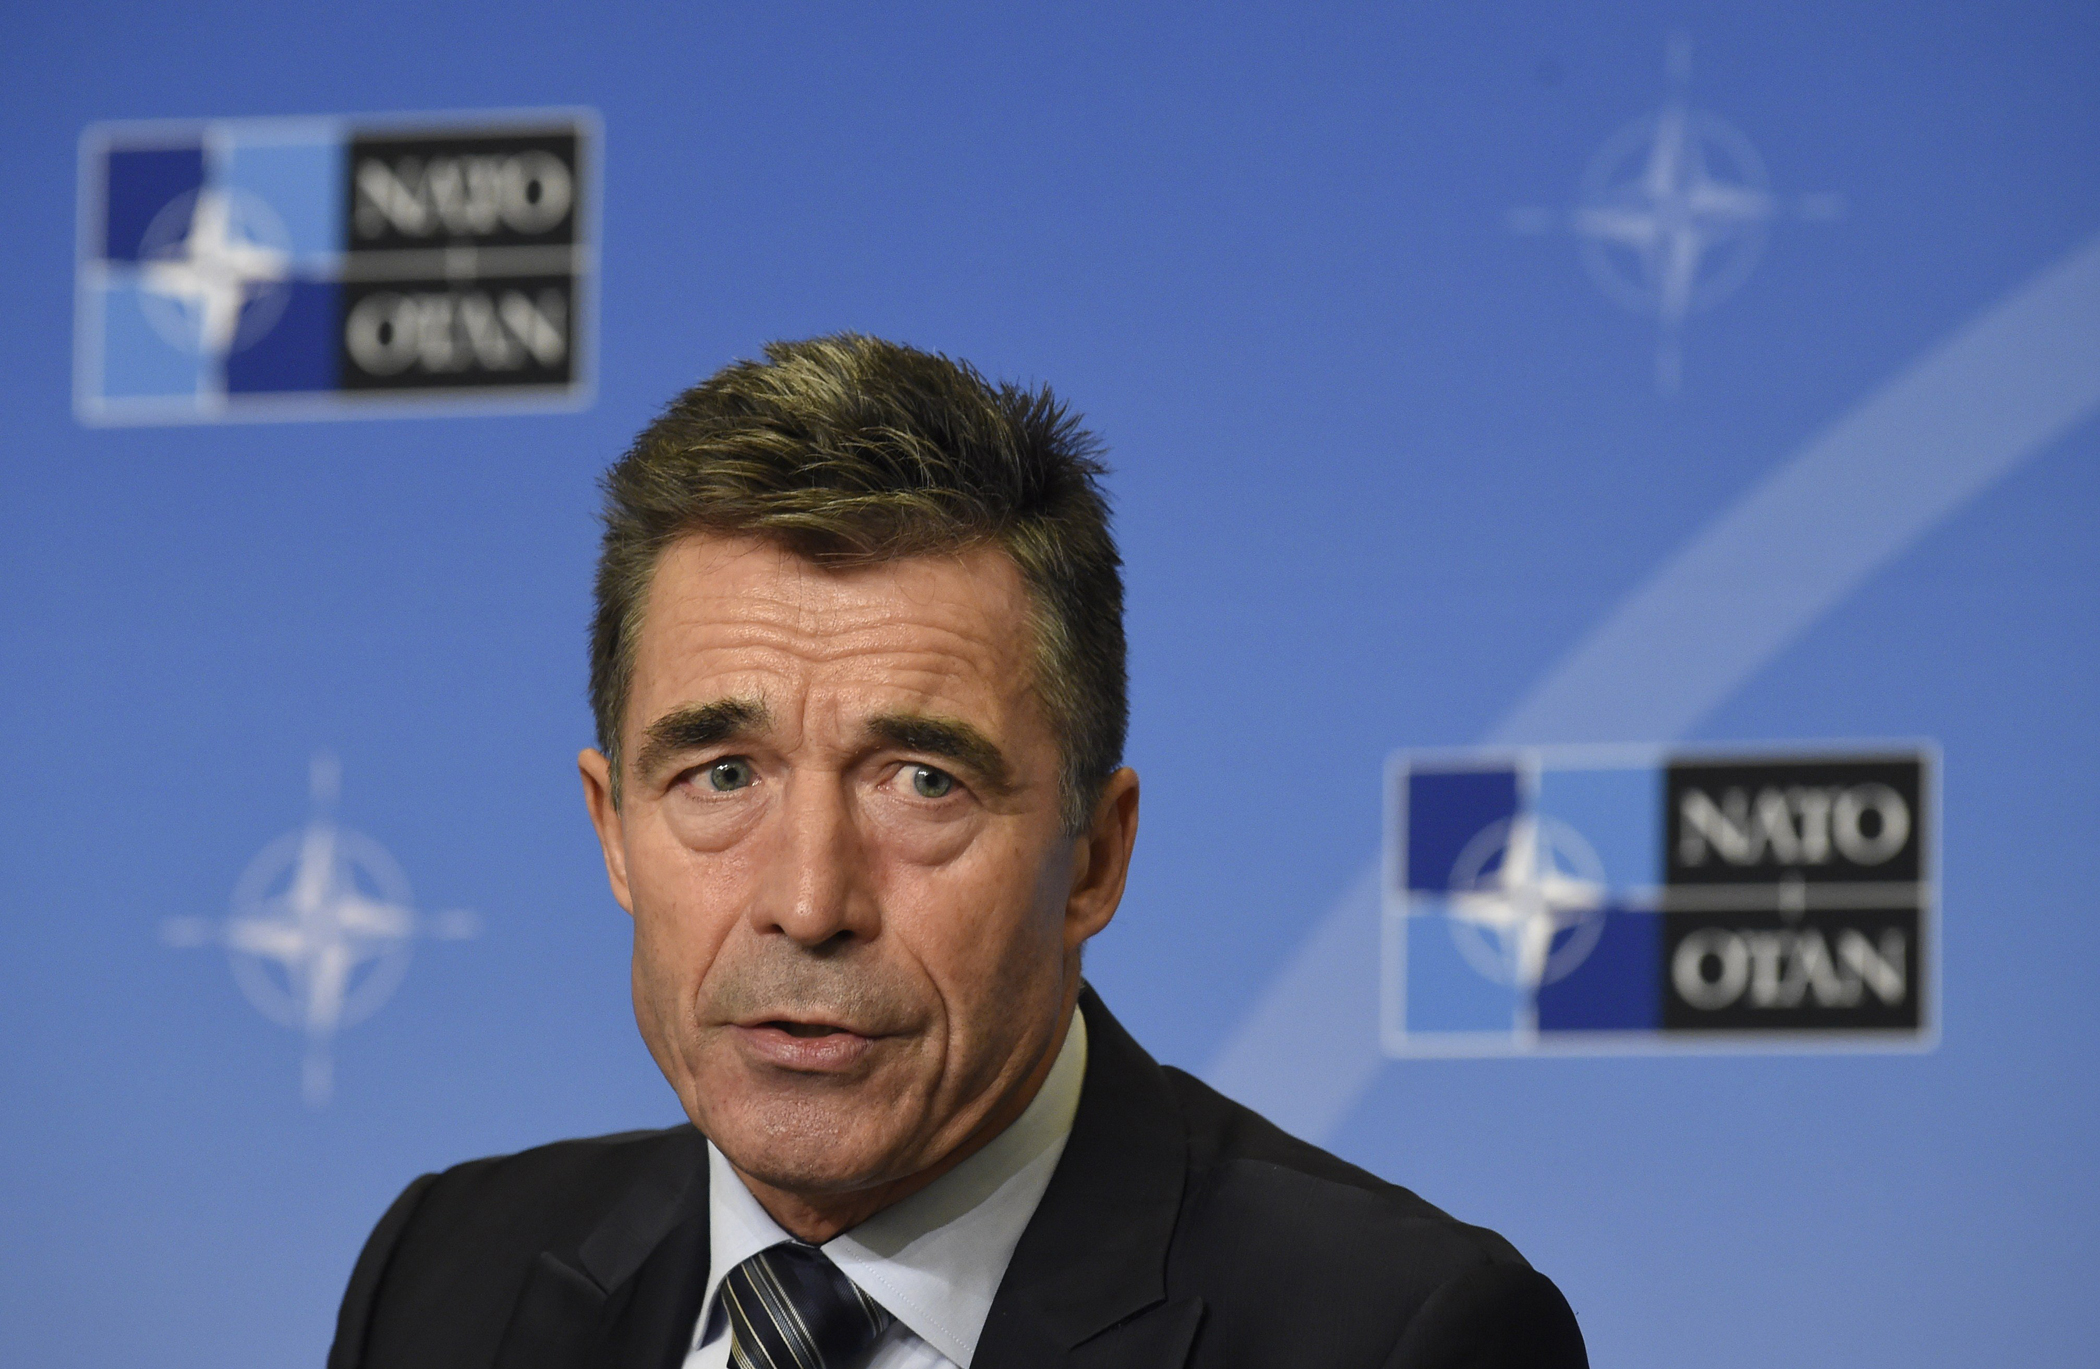 Secretary-General of NATO, Anders Fogh Rasmussen gives a press on Sept. 1, 2014 in Brussels.